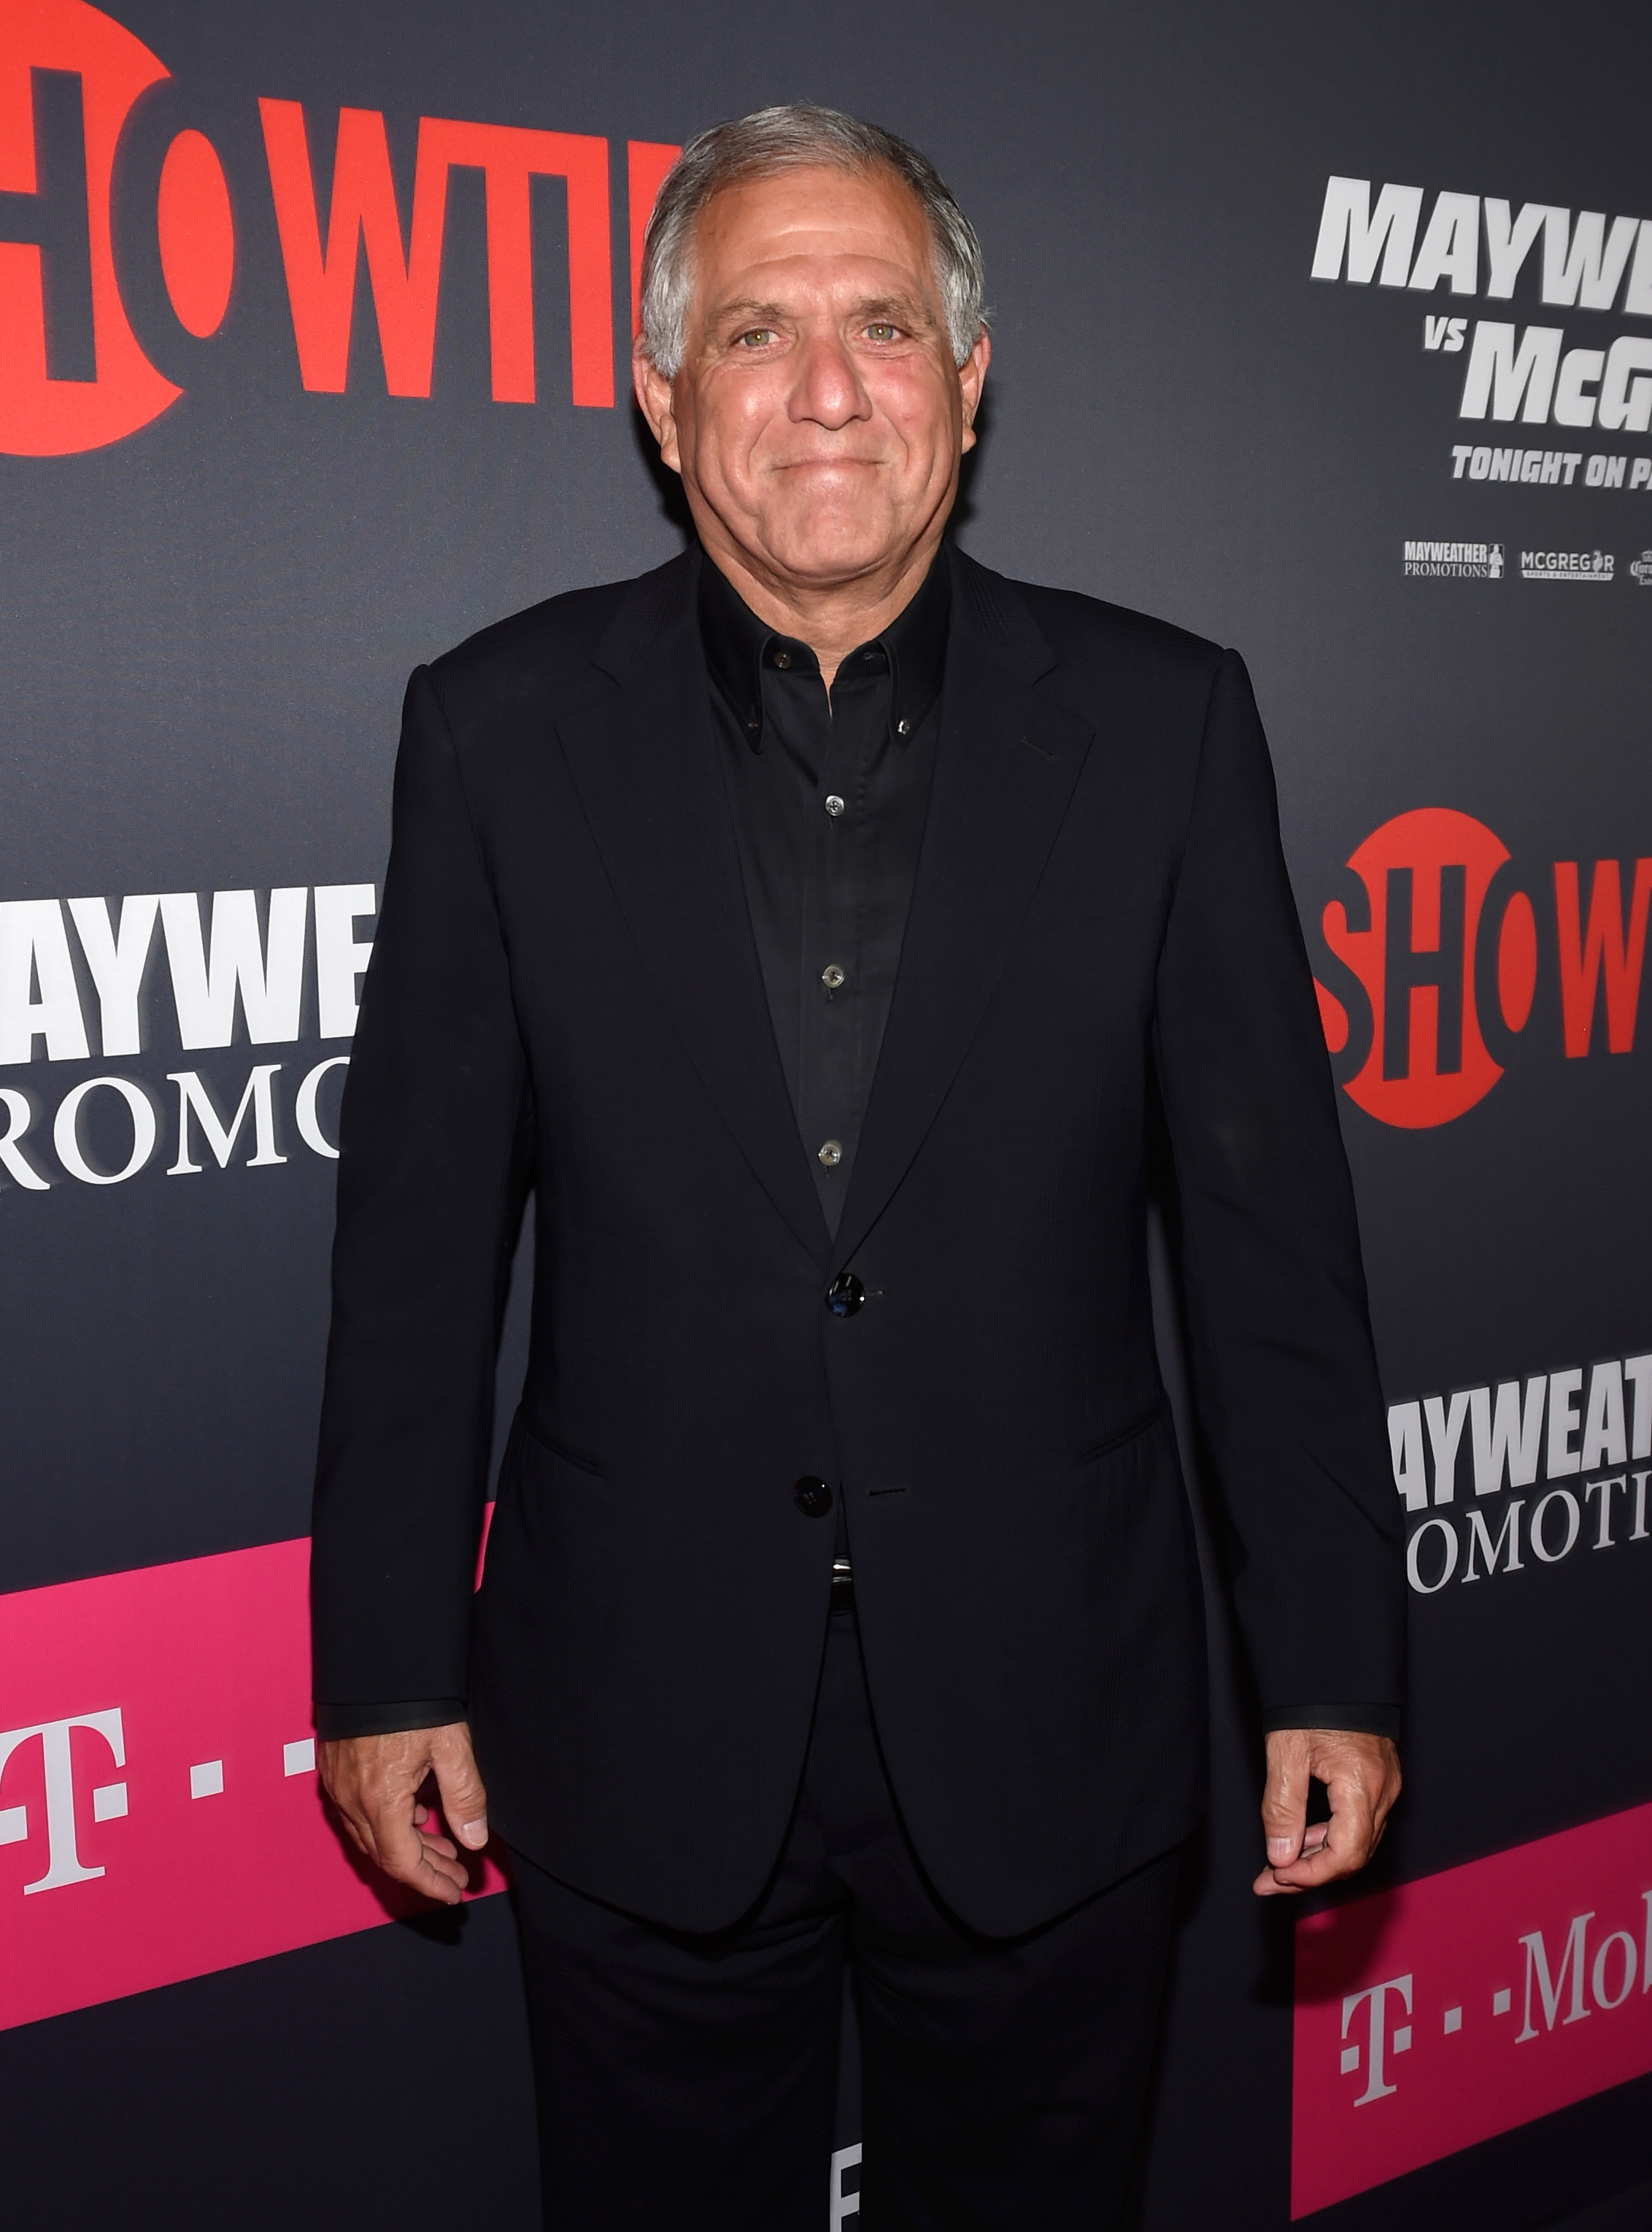 LAS VEGAS, NV - AUGUST 26: CBS Chief Executive Officer Leslie Moonves arrives for T-Mobile's Showtime, WME IME and Mayweather Promotions VIP Pre-Fight Party for Mayweather vs. McGregor at T-Mobile Arena on August 26, 2017 in Las Vegas, Nevada. (Photo by David Becker/Getty Images for Showtime)